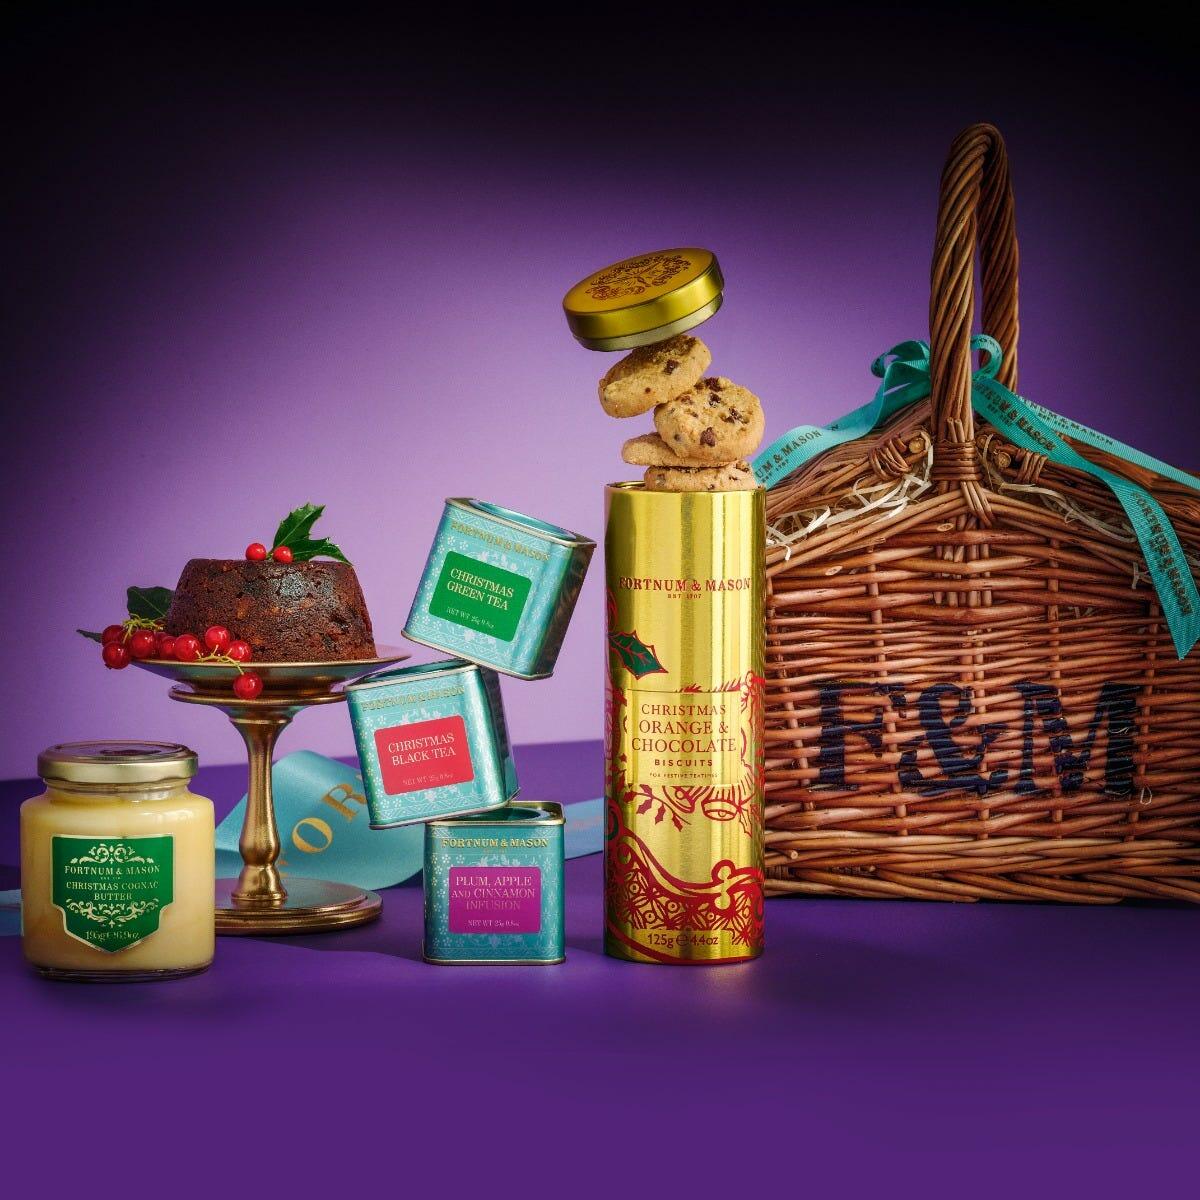 The Merrymaker's Hamper, Biscuits, Chocolates, Teas, Puddings, Fortnum & Mason